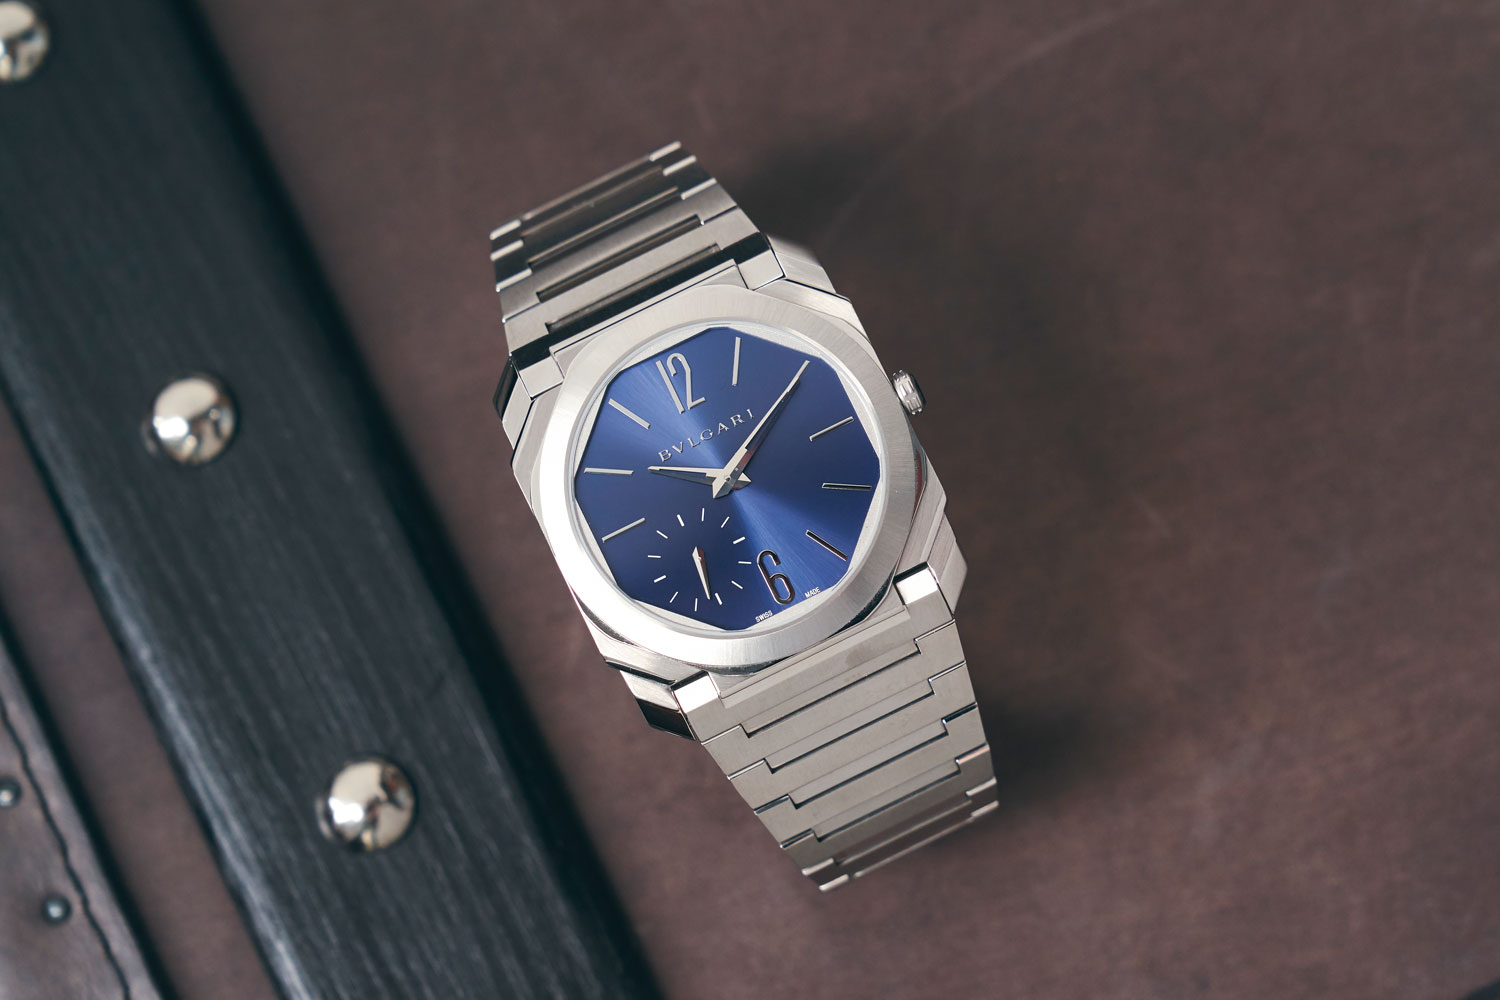 The Octo Finissimo Automatic in satin polished steel with blue dial (Image © Revolution)